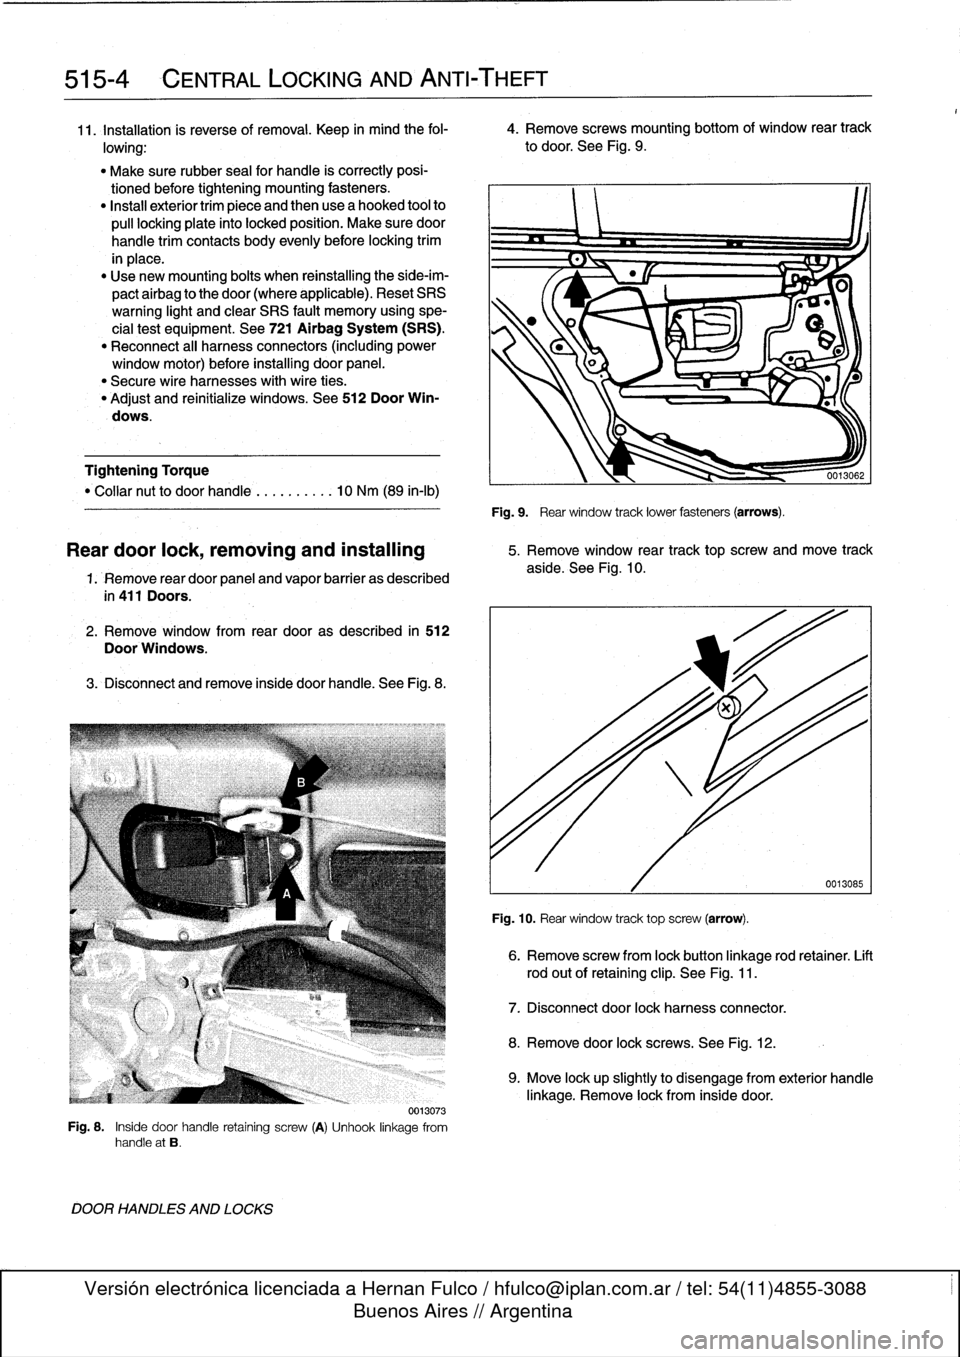 BMW M3 1998 E36 Owners Manual 
515-4

	

CENTRAL
LOCKING
AND
ANTI-THEFT

11
.
Installation
is
reverse
of
removal
.
Keep
in
mind
the
fol-

	

4
.
Remove
screws
mounting
bottom
of
window
rear
track

lowing
:

	

to
door
.
See
Fig
.
